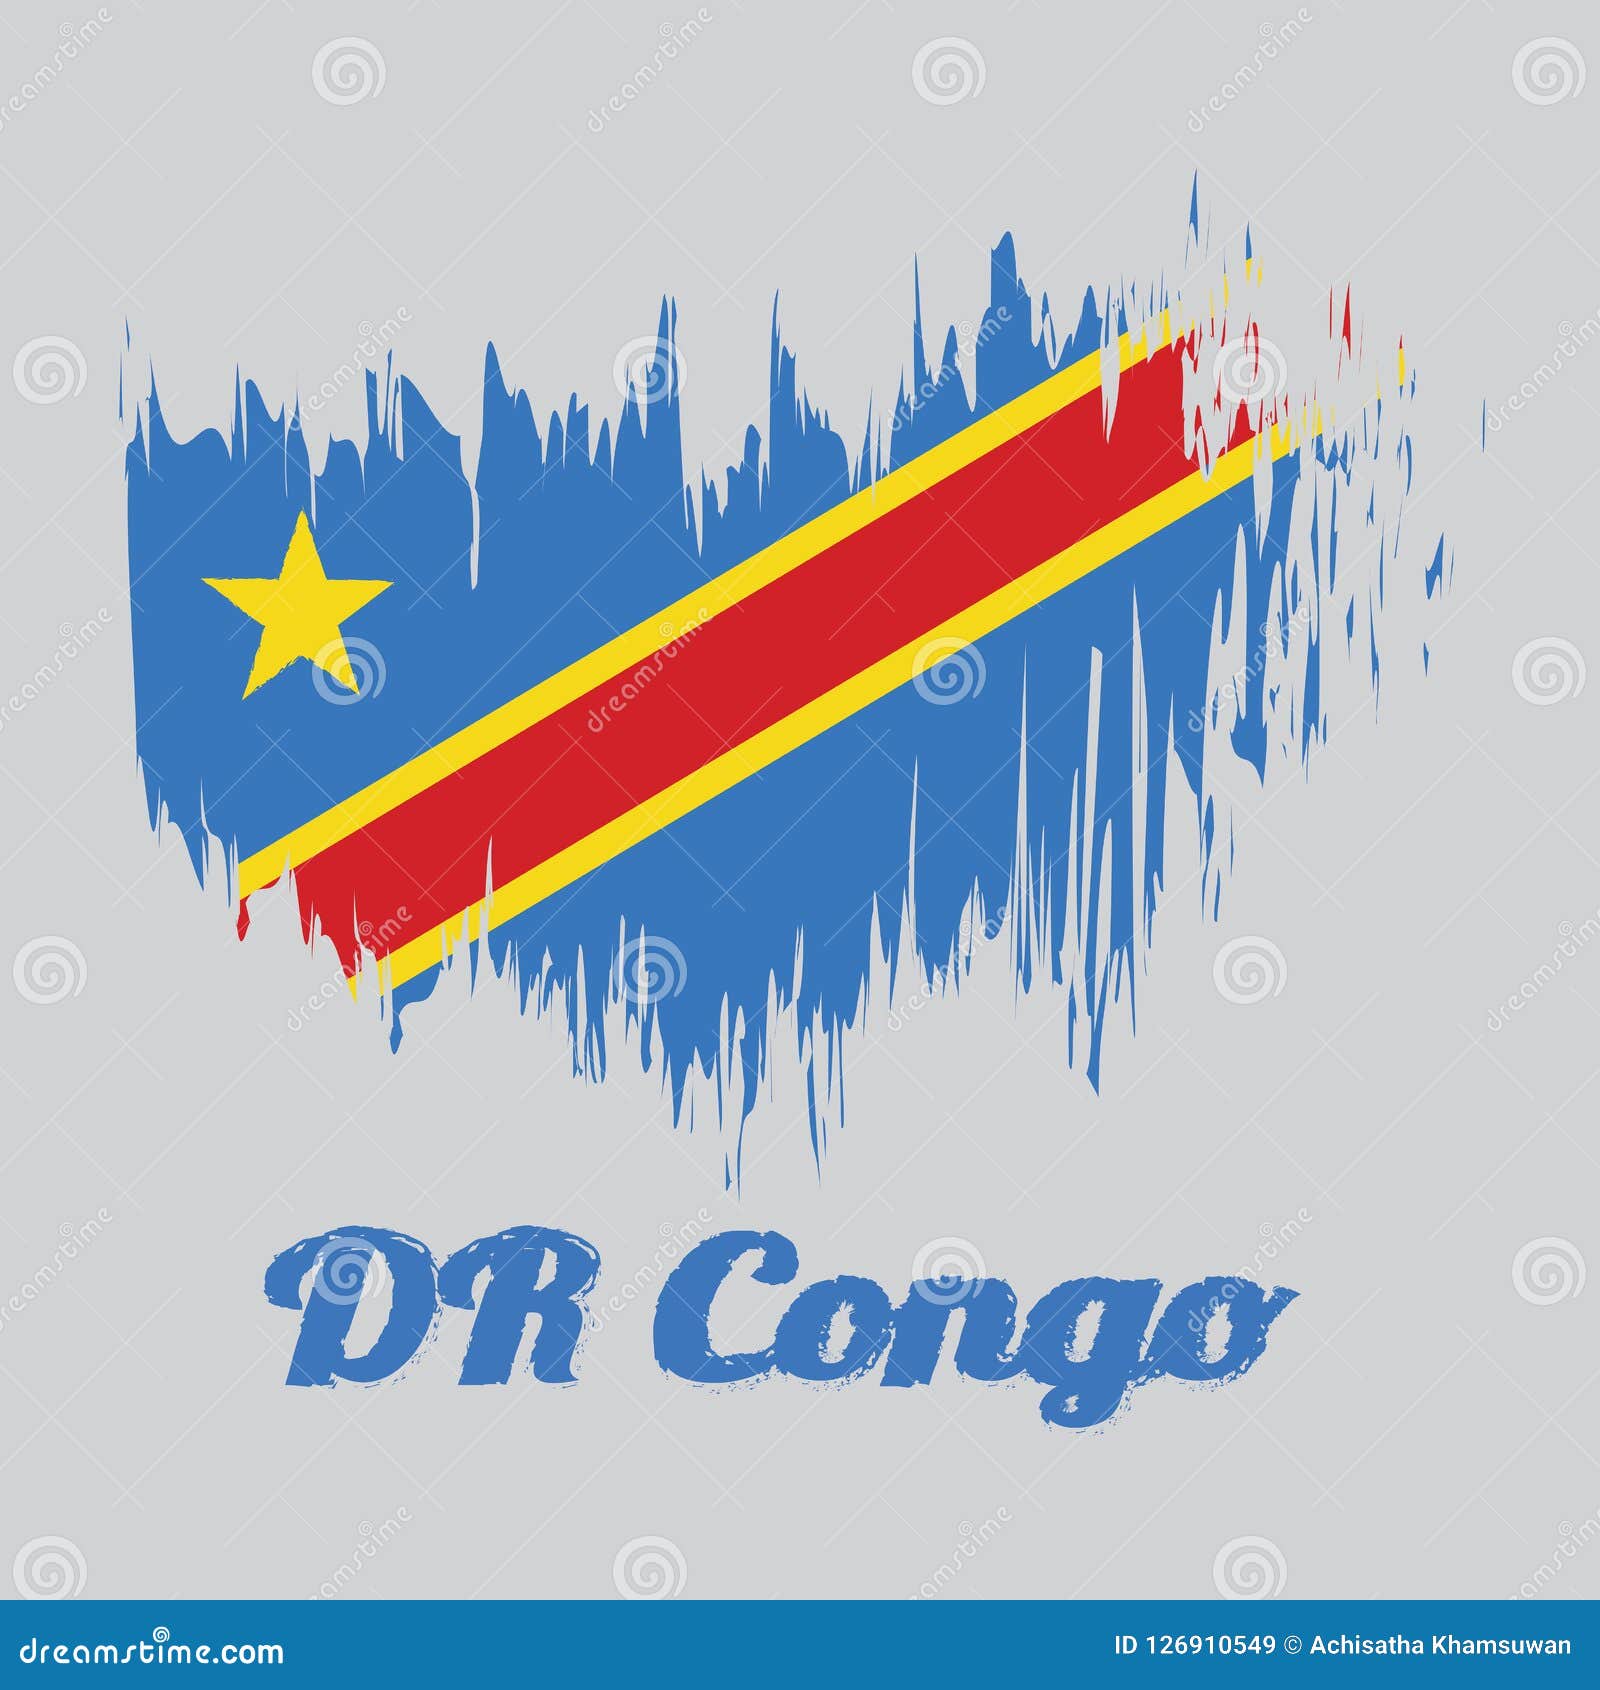 Image result for dr congo name